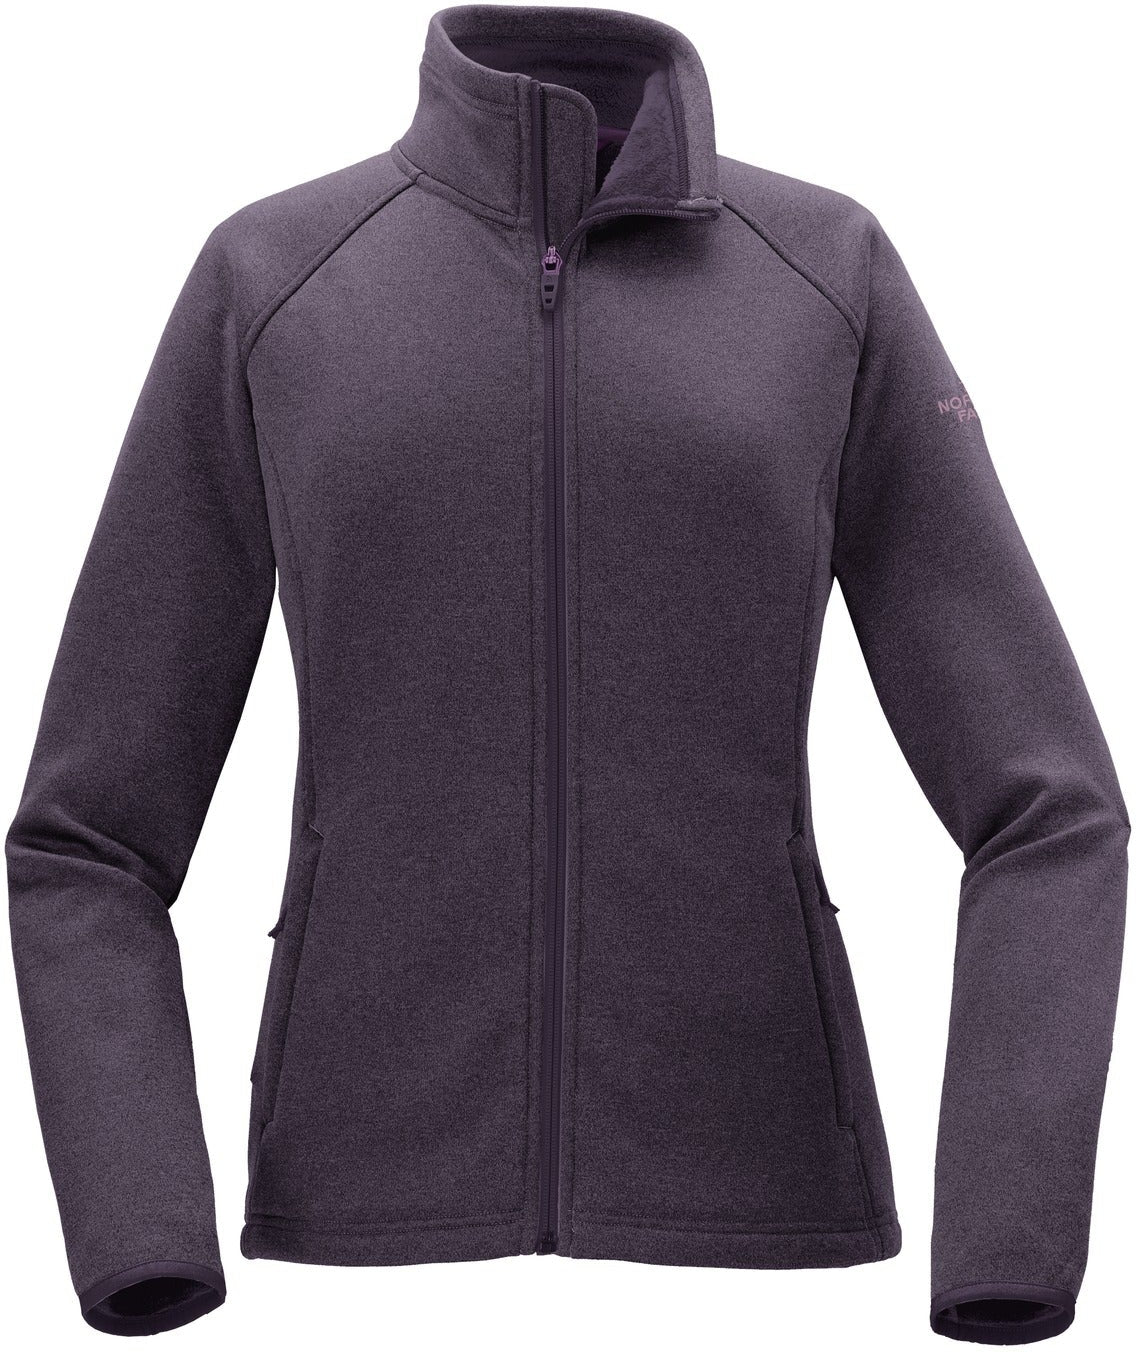 Closeout - The North Face Ladies Canyon Flats Fleece Jacket